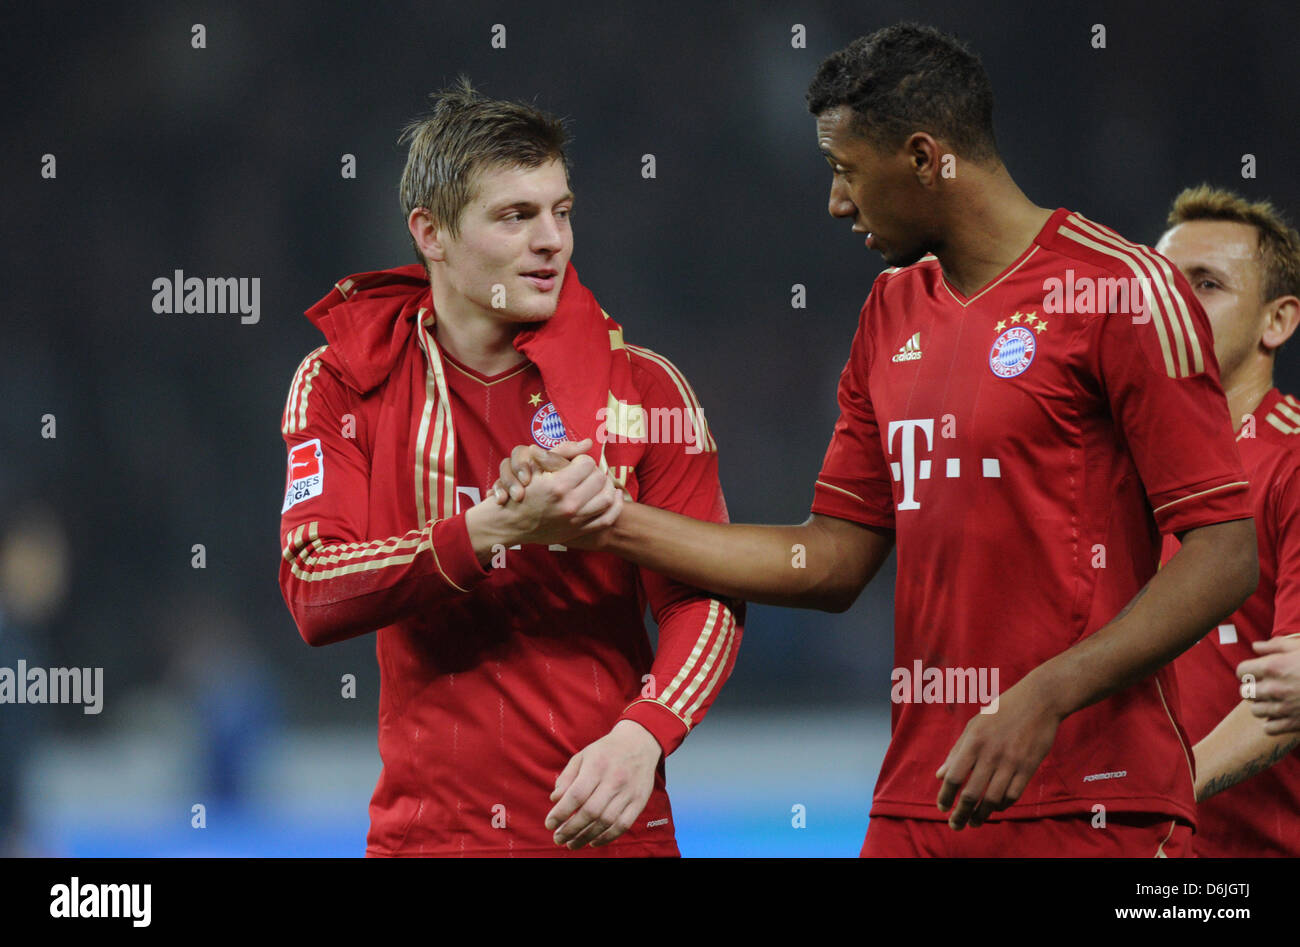 Bayern's Toni Kroos (L) and Jerome Boateng shake hands after the Bundesliga soccer match between Hertha BSC and Bayern Munich at the Olympic Stadium in Berlin, Germany, 17 March 2012. Hertha BSC lost the match 0-6. Photo: Soeren Stache Stock Photo